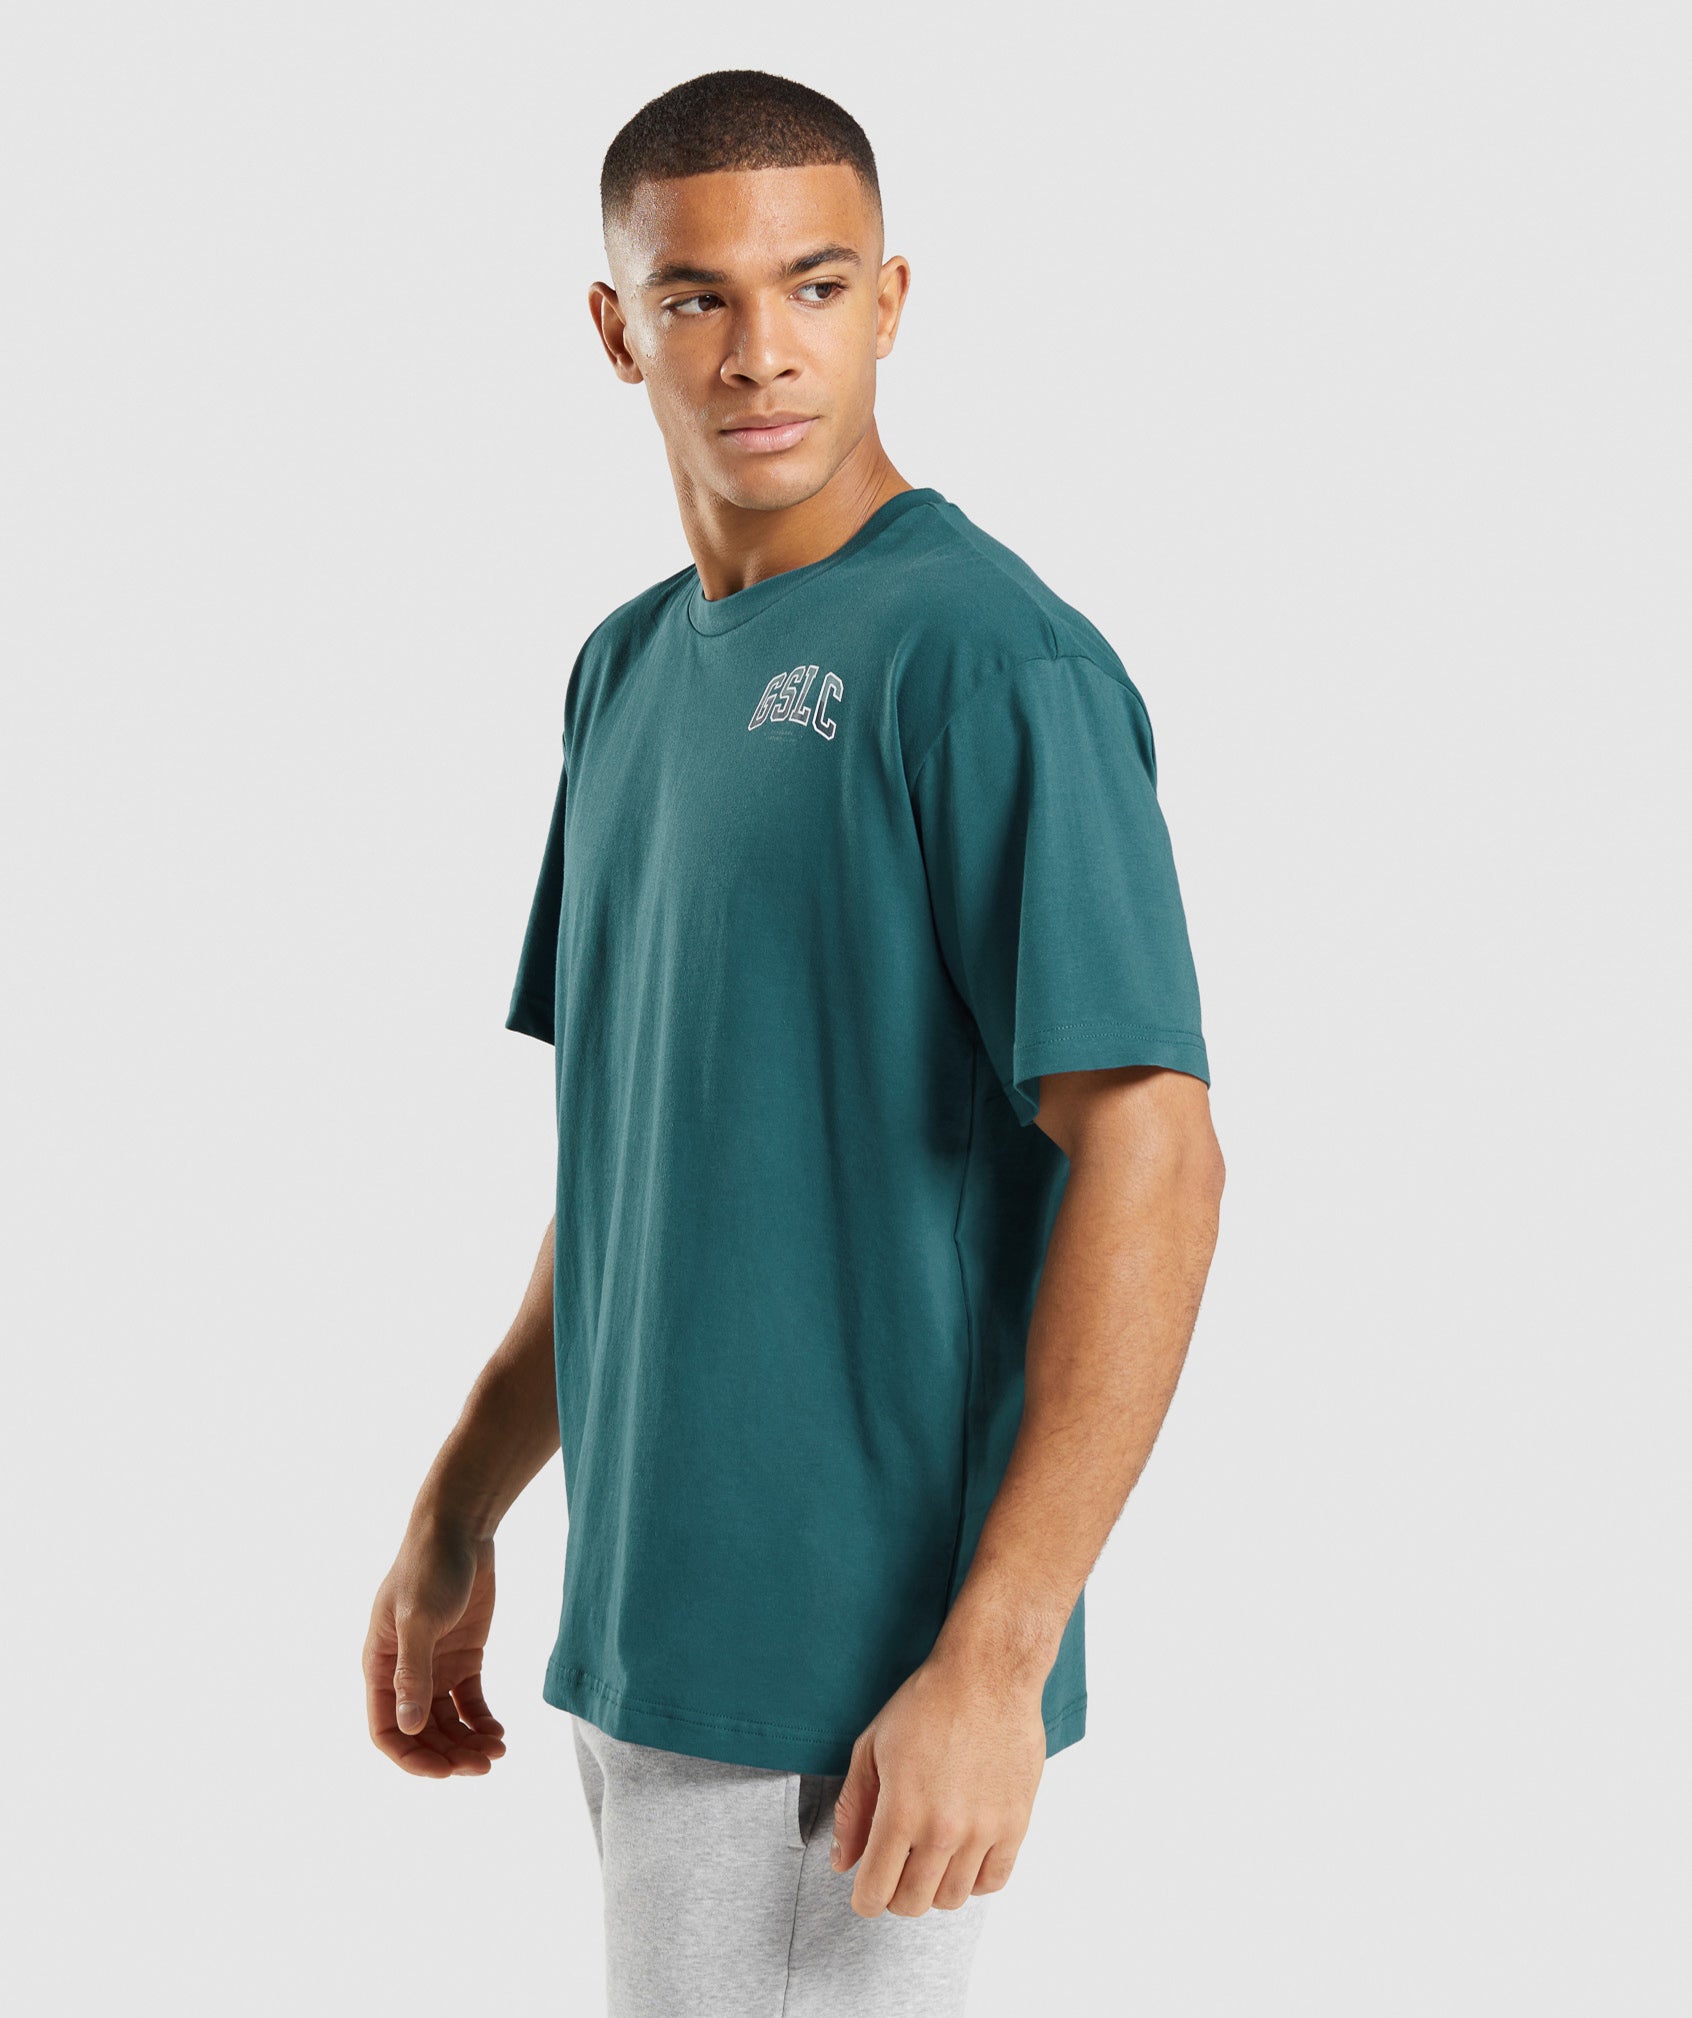 GSLC Oversized T-Shirt in Teal - view 3